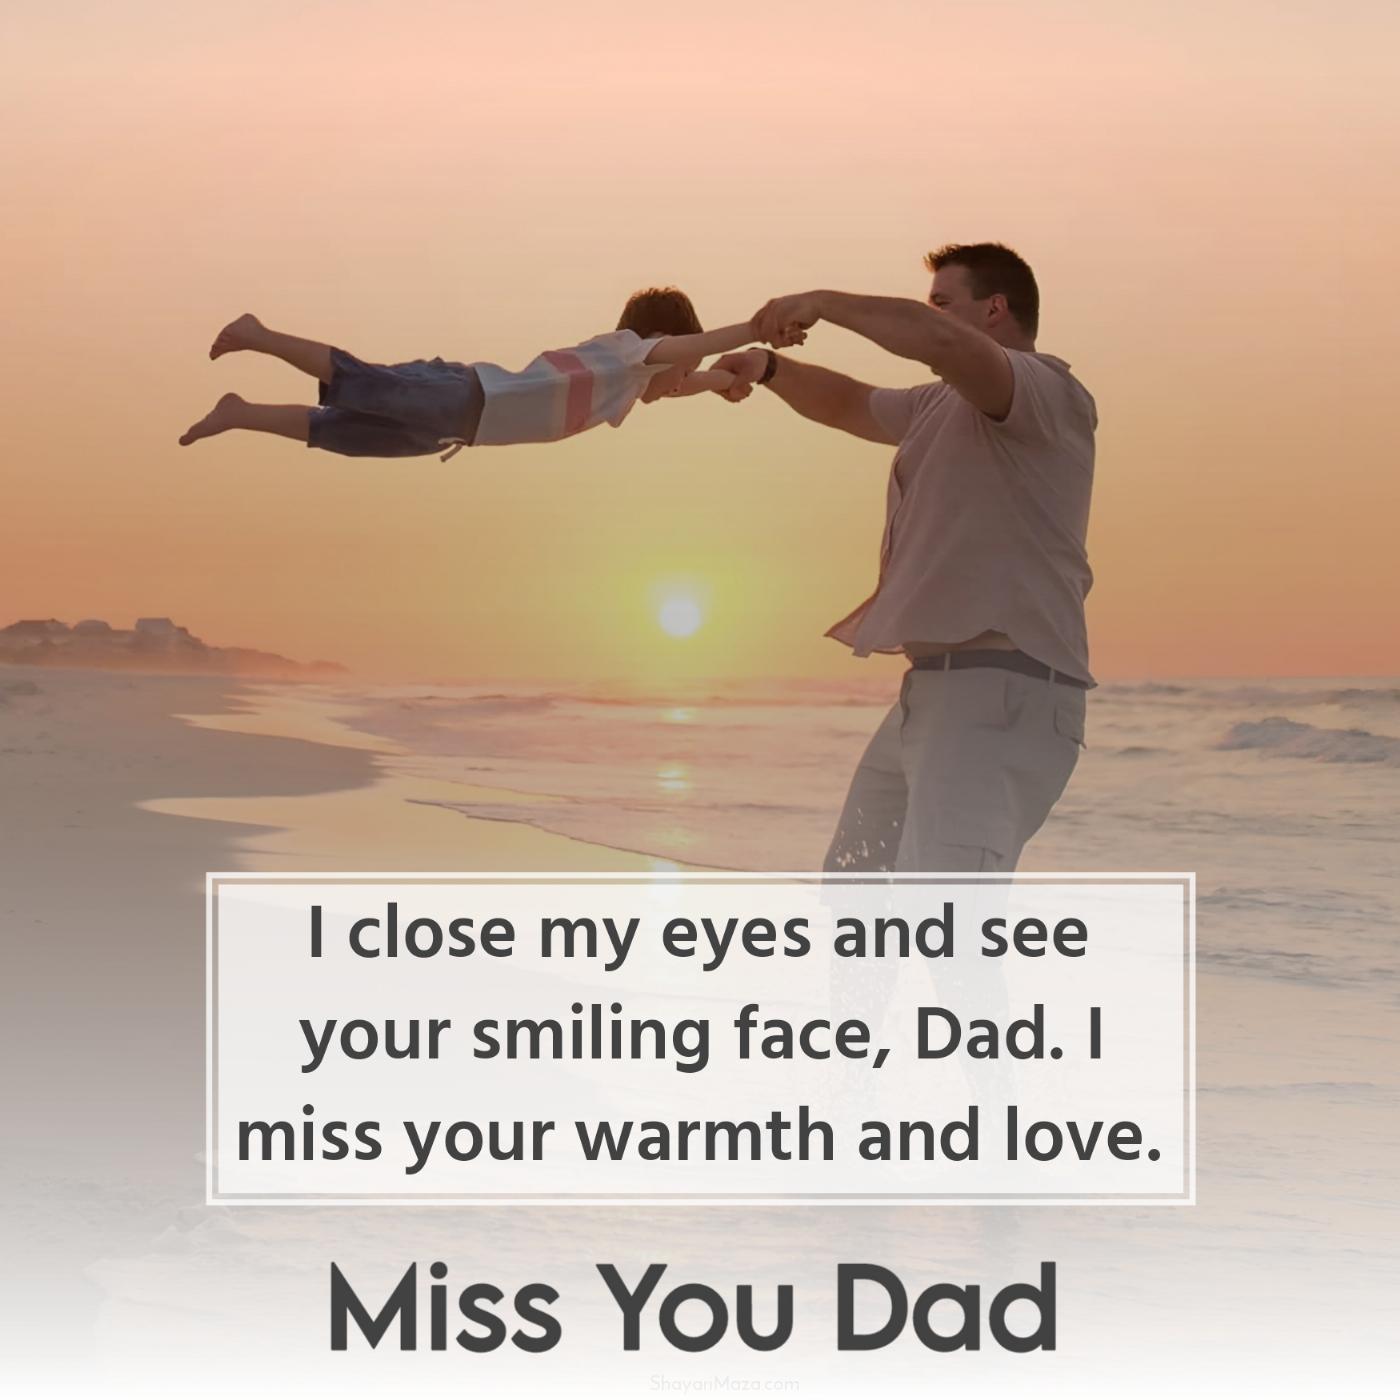 I close my eyes and see your smiling face Dad